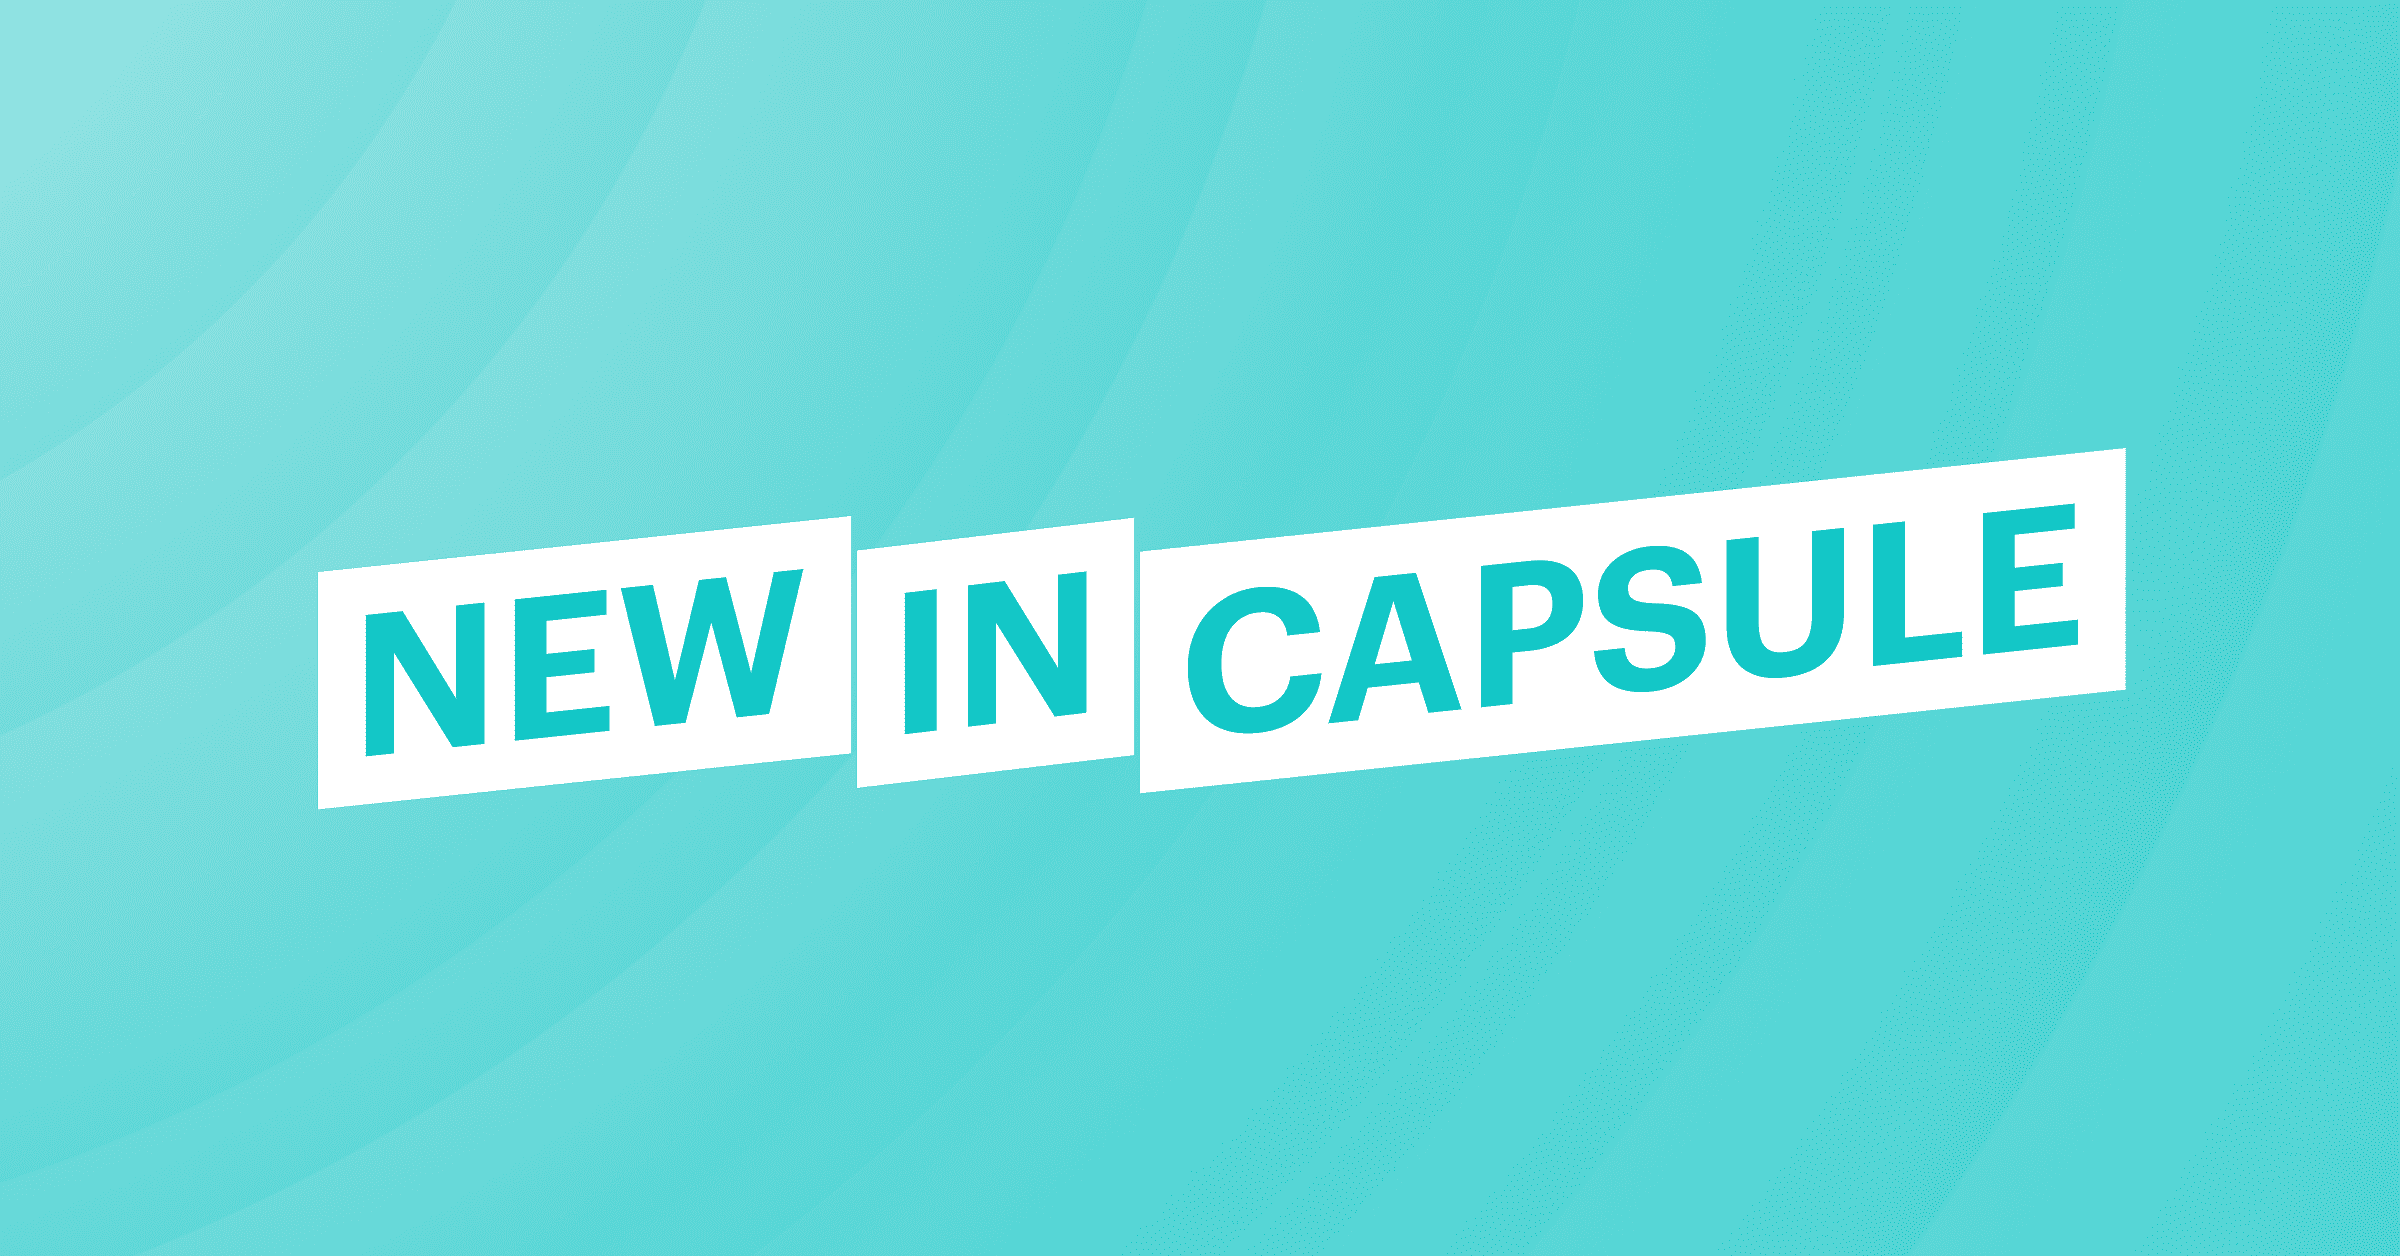 What’s new in Capsule: Updates you might have missed